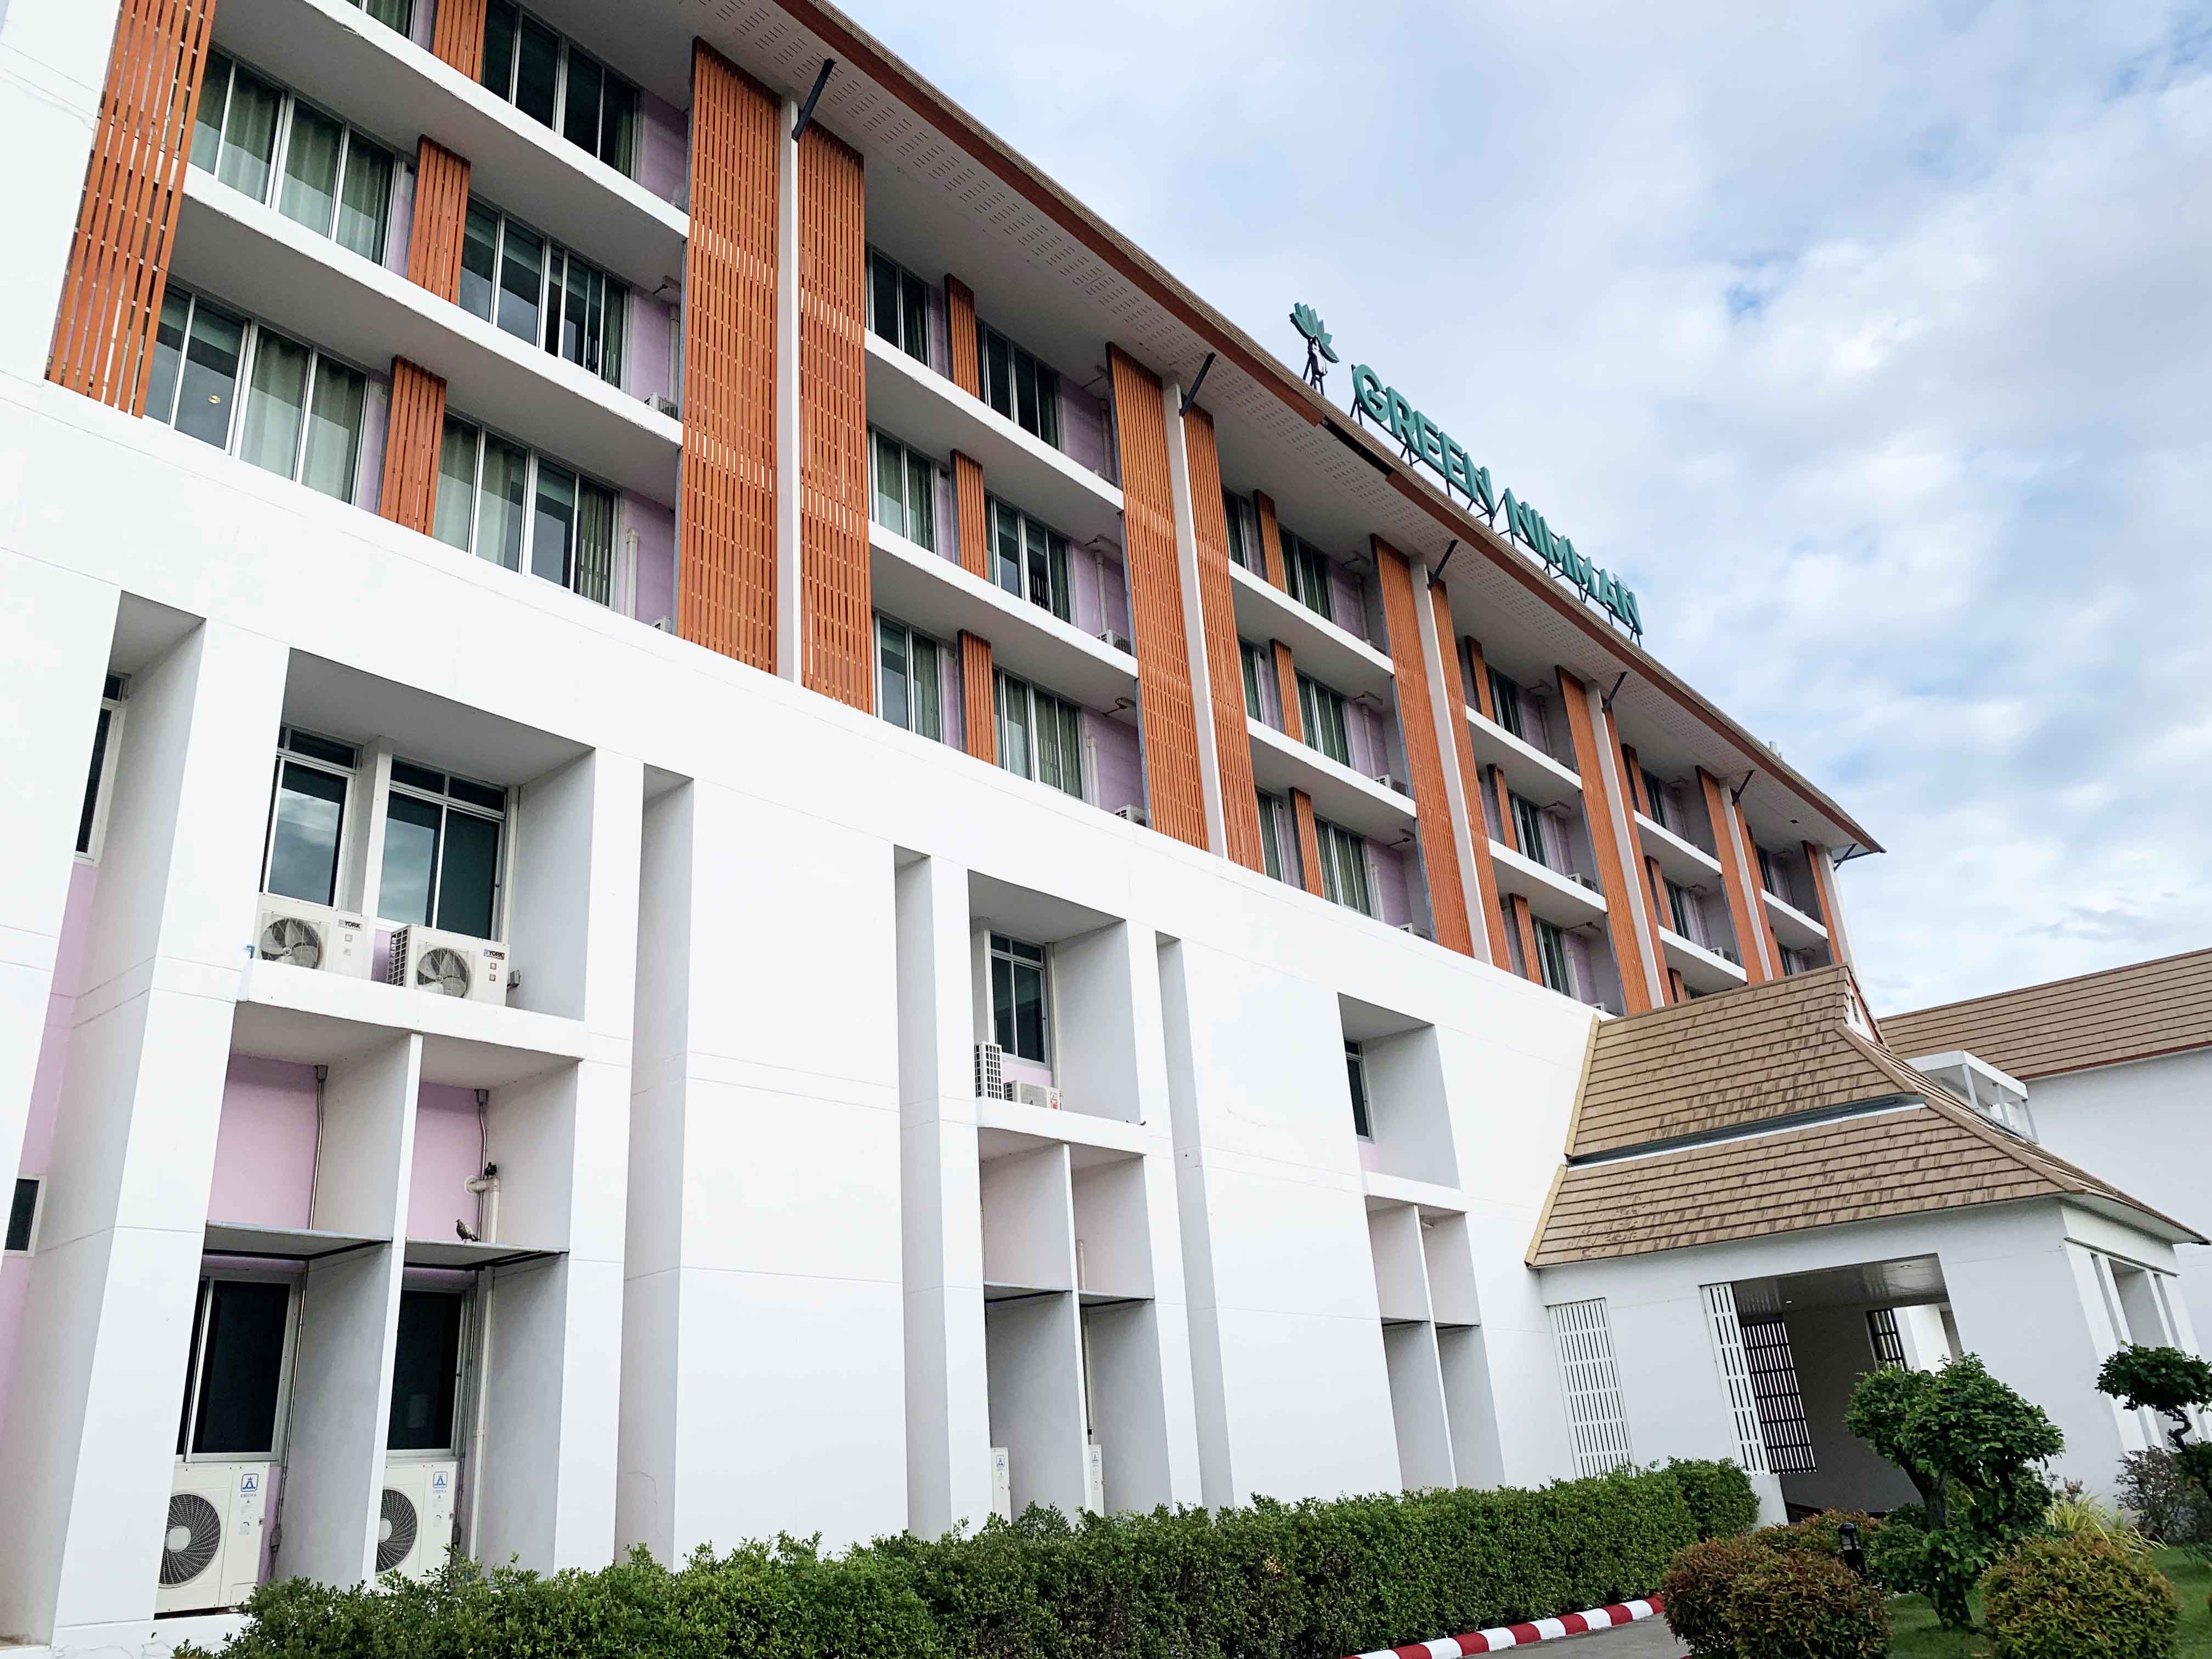 Exterior of Green Nimman dormitory in Chiang Mai, Thailand.